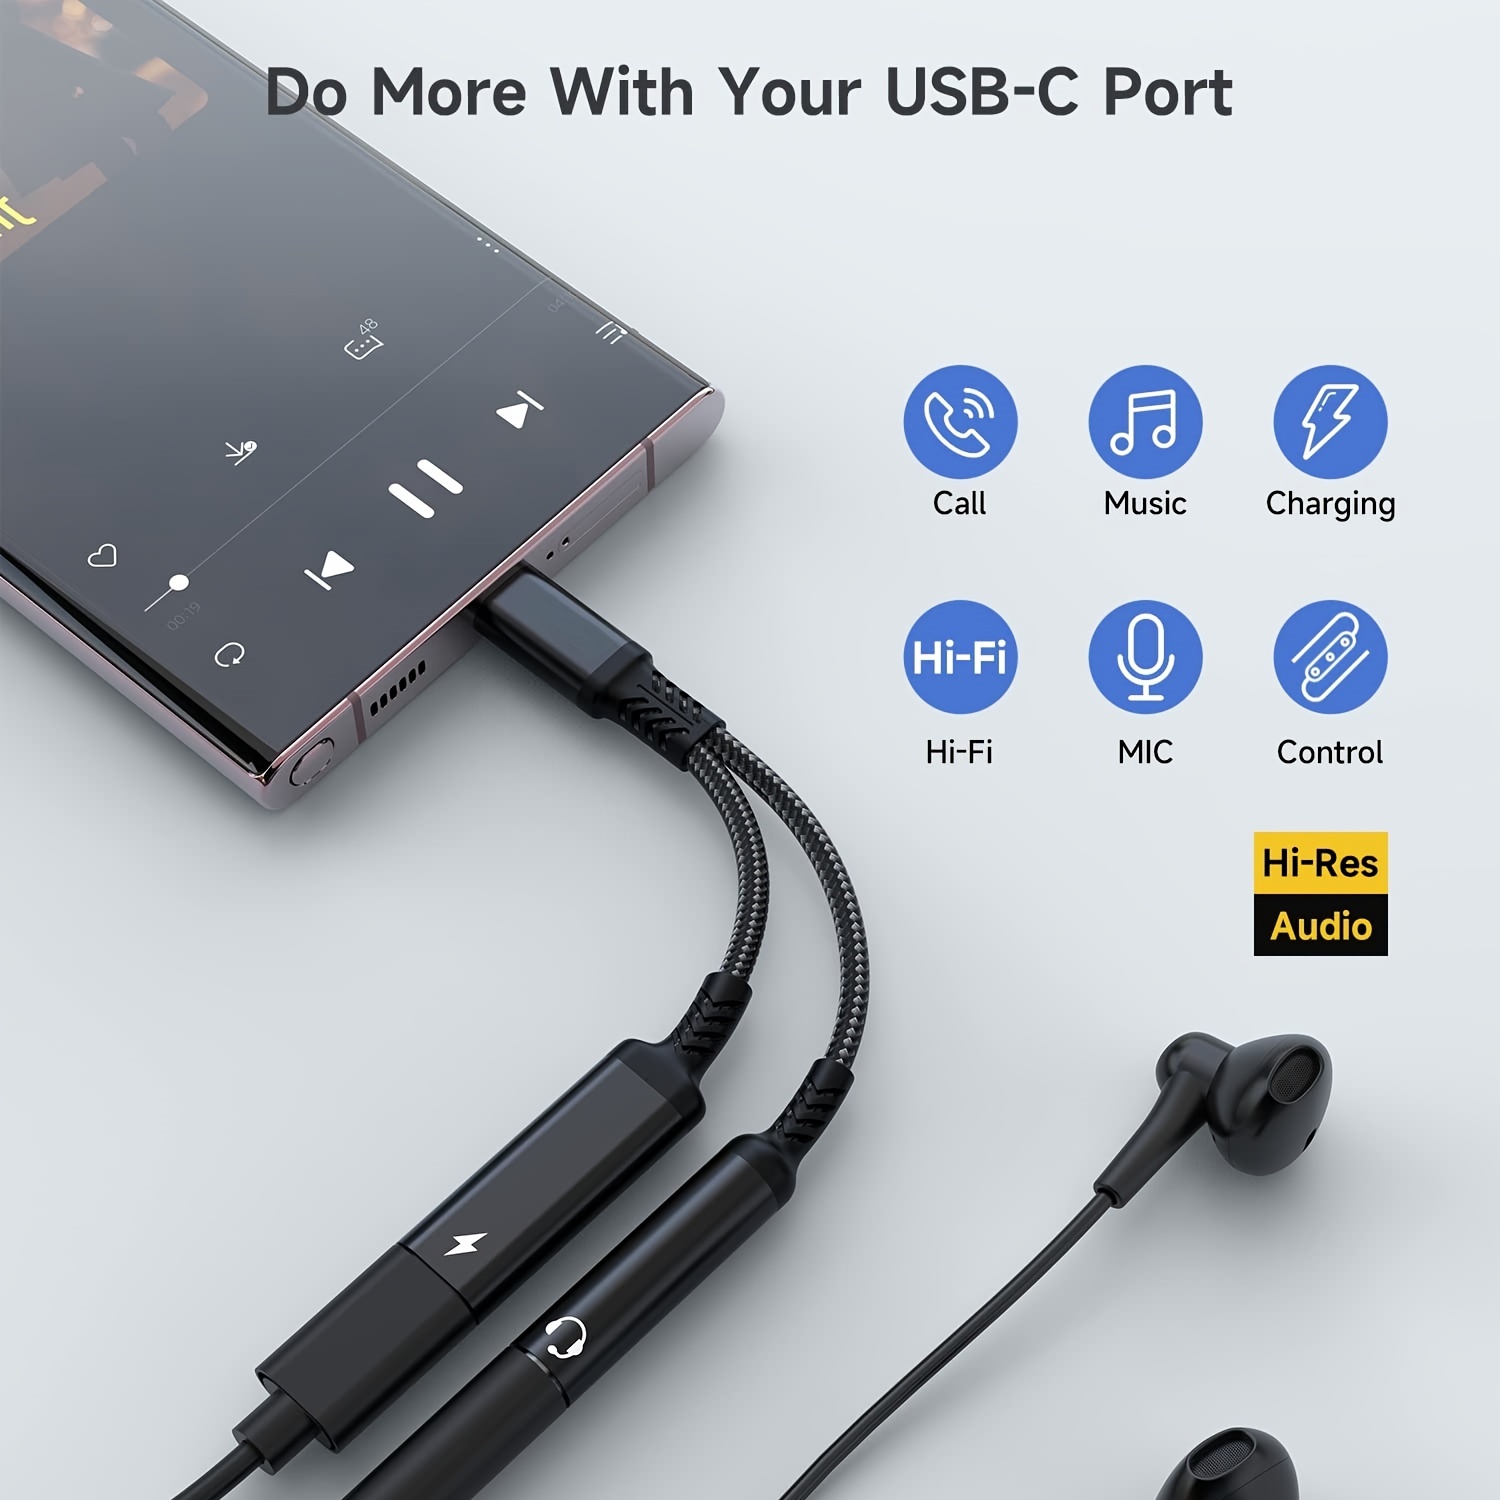  Samsung Galaxy S23 Ultra Headphone Adapter, 2 in 1 USB C to  3.5mm Headphone Jack Hi-Res DAC and Safe PD 60W Fast Charging Dongle Cord  Compatible Google Pixel 7 6, Galaxy